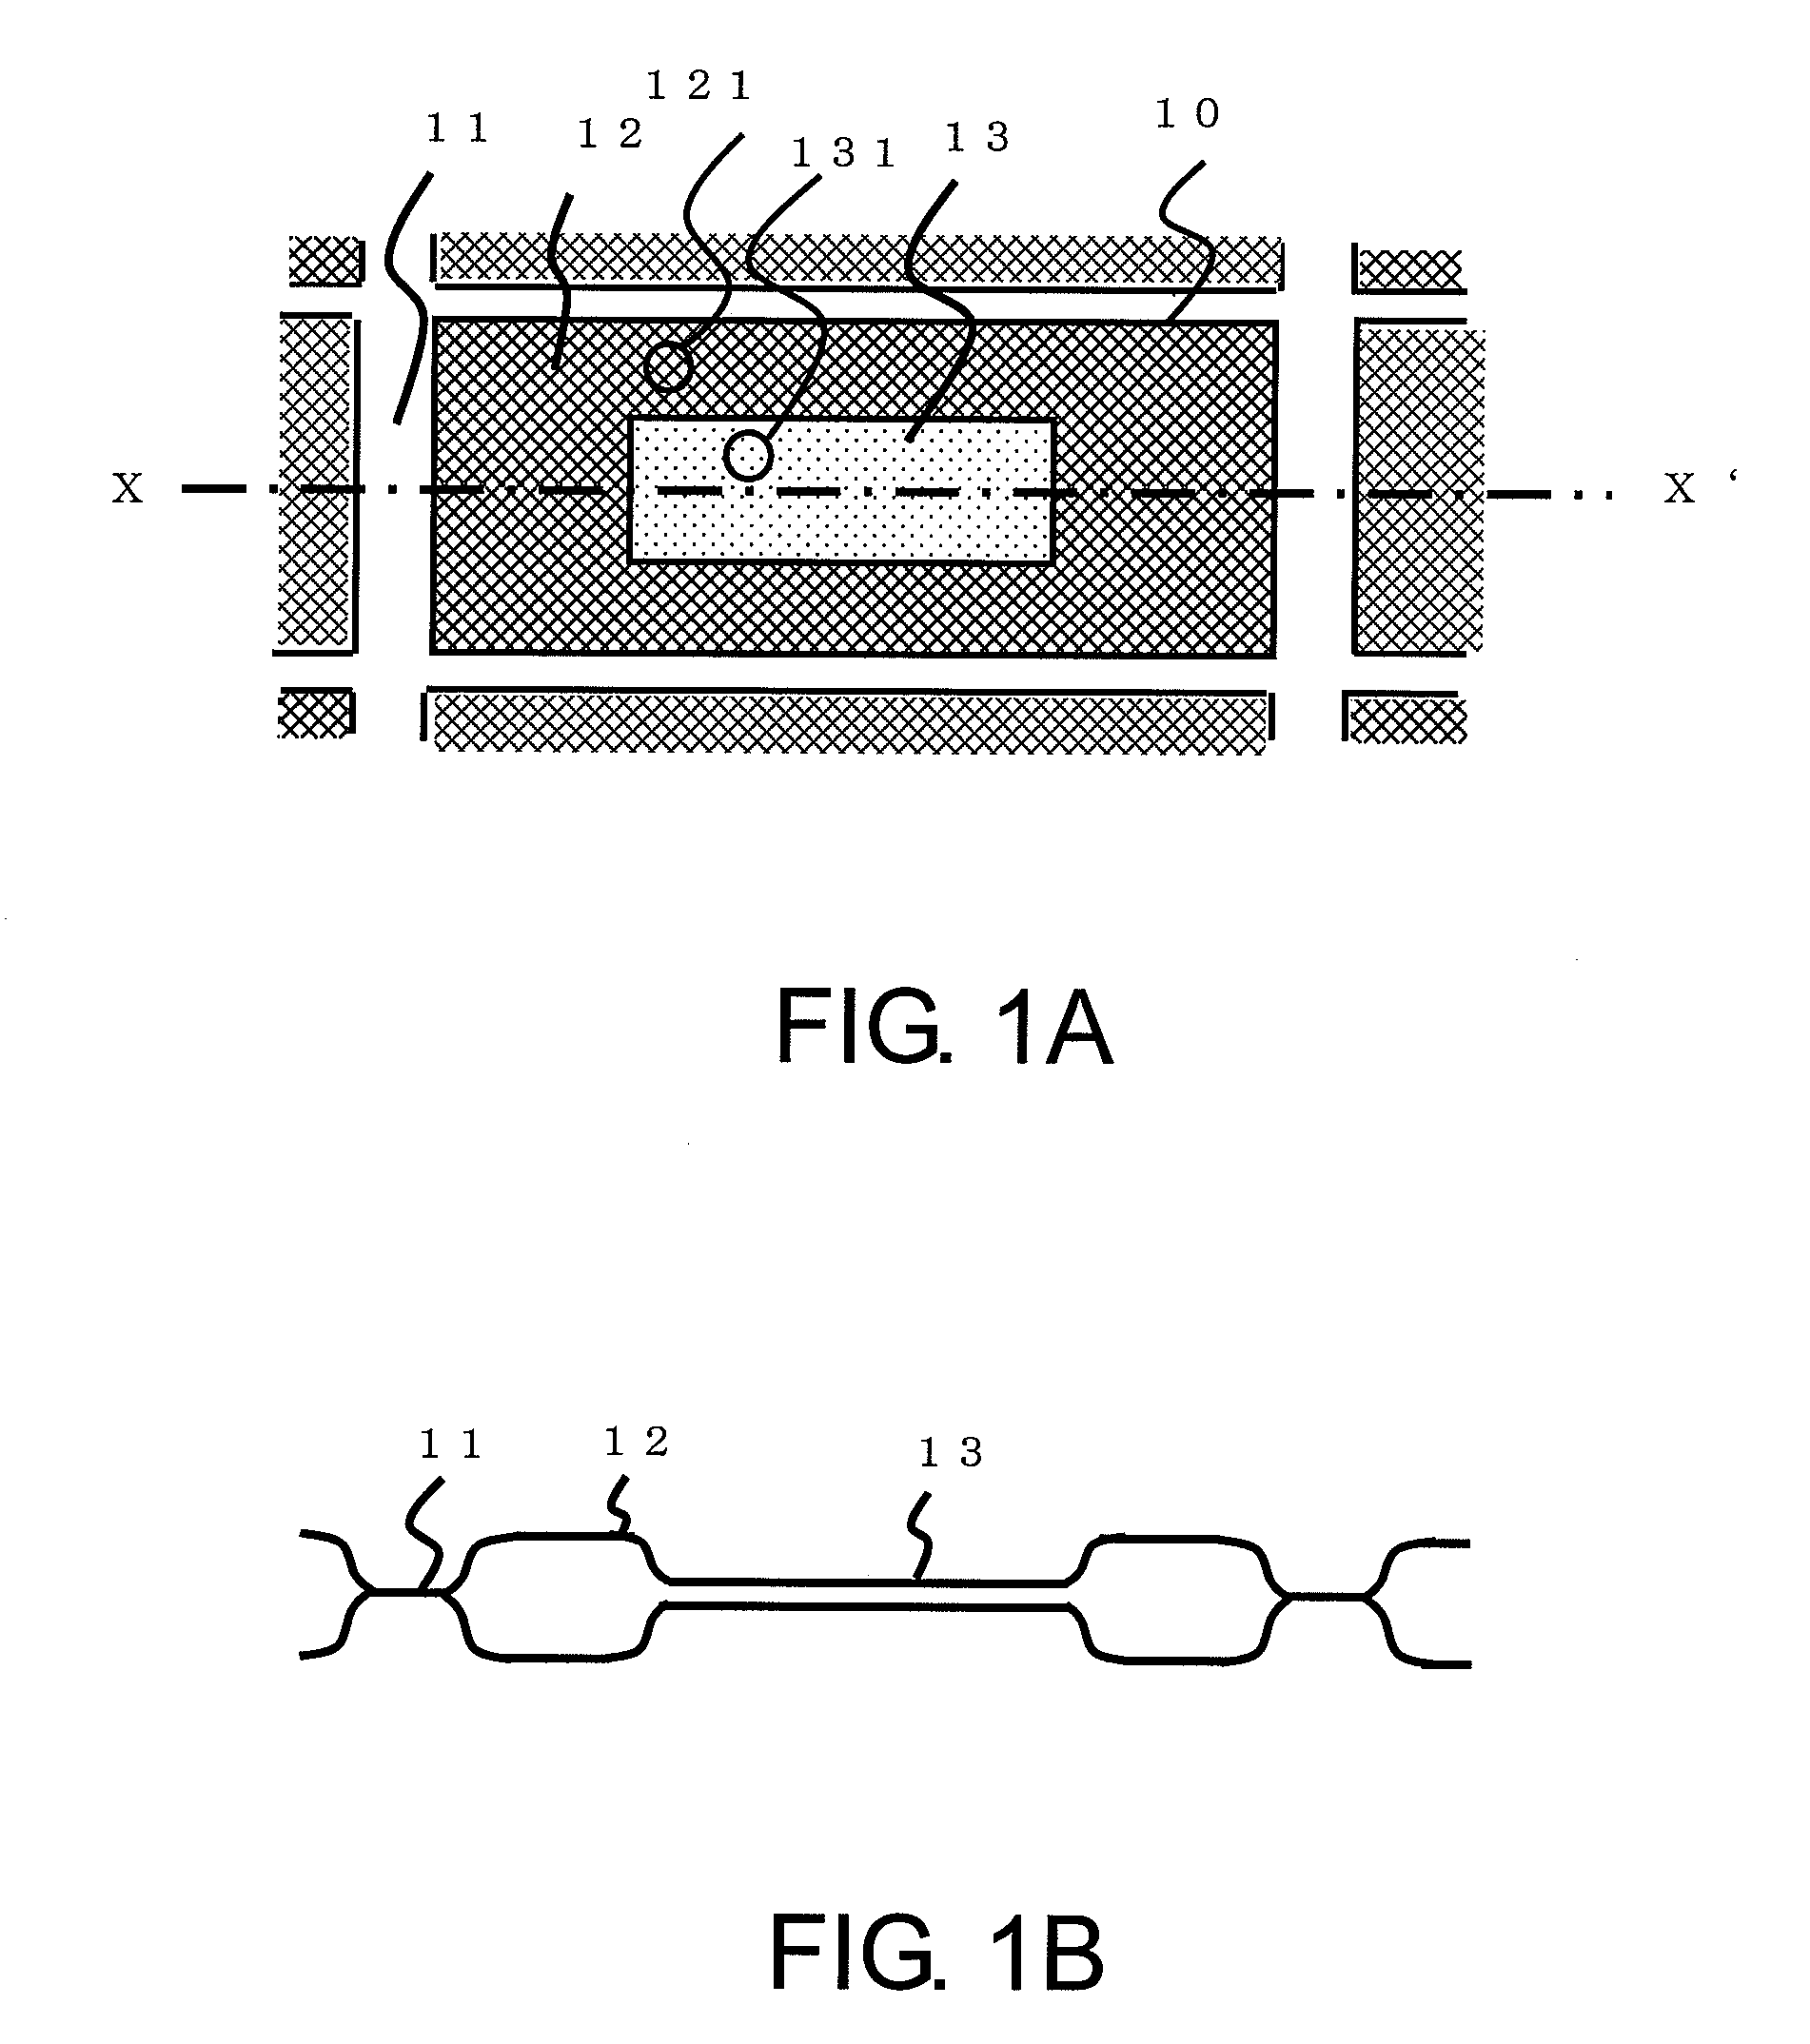 Visual inspection apparatus for a wafer